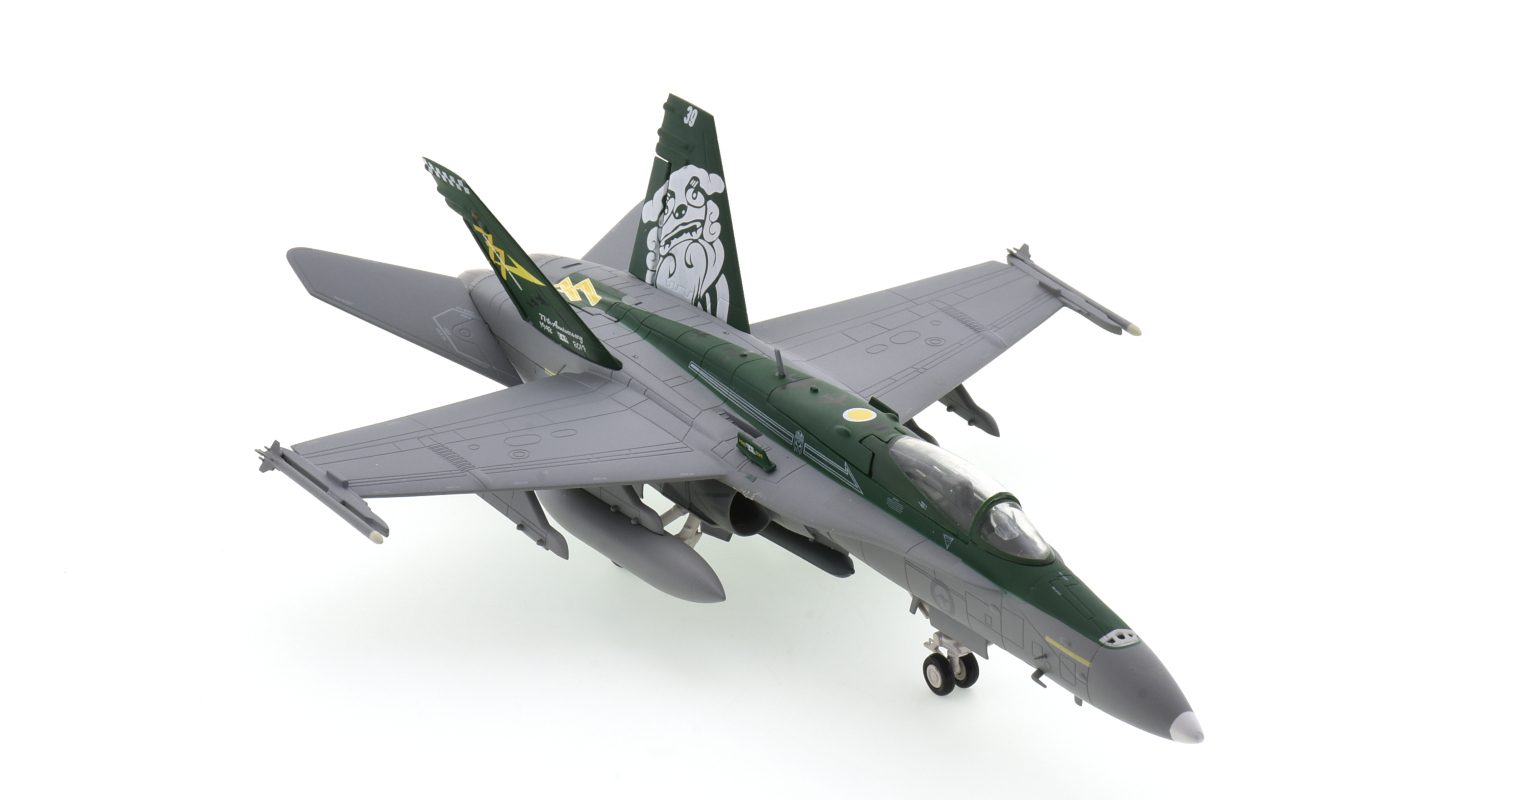 Front starboard side view of Herpa Wings HE580601 - 1/72 scale diecast model McDonnell Douglas F/A-18A Hornet, s/n A21-39, No.77 Sqn, RAAF, squadrons 77th Anniversary, 2019.